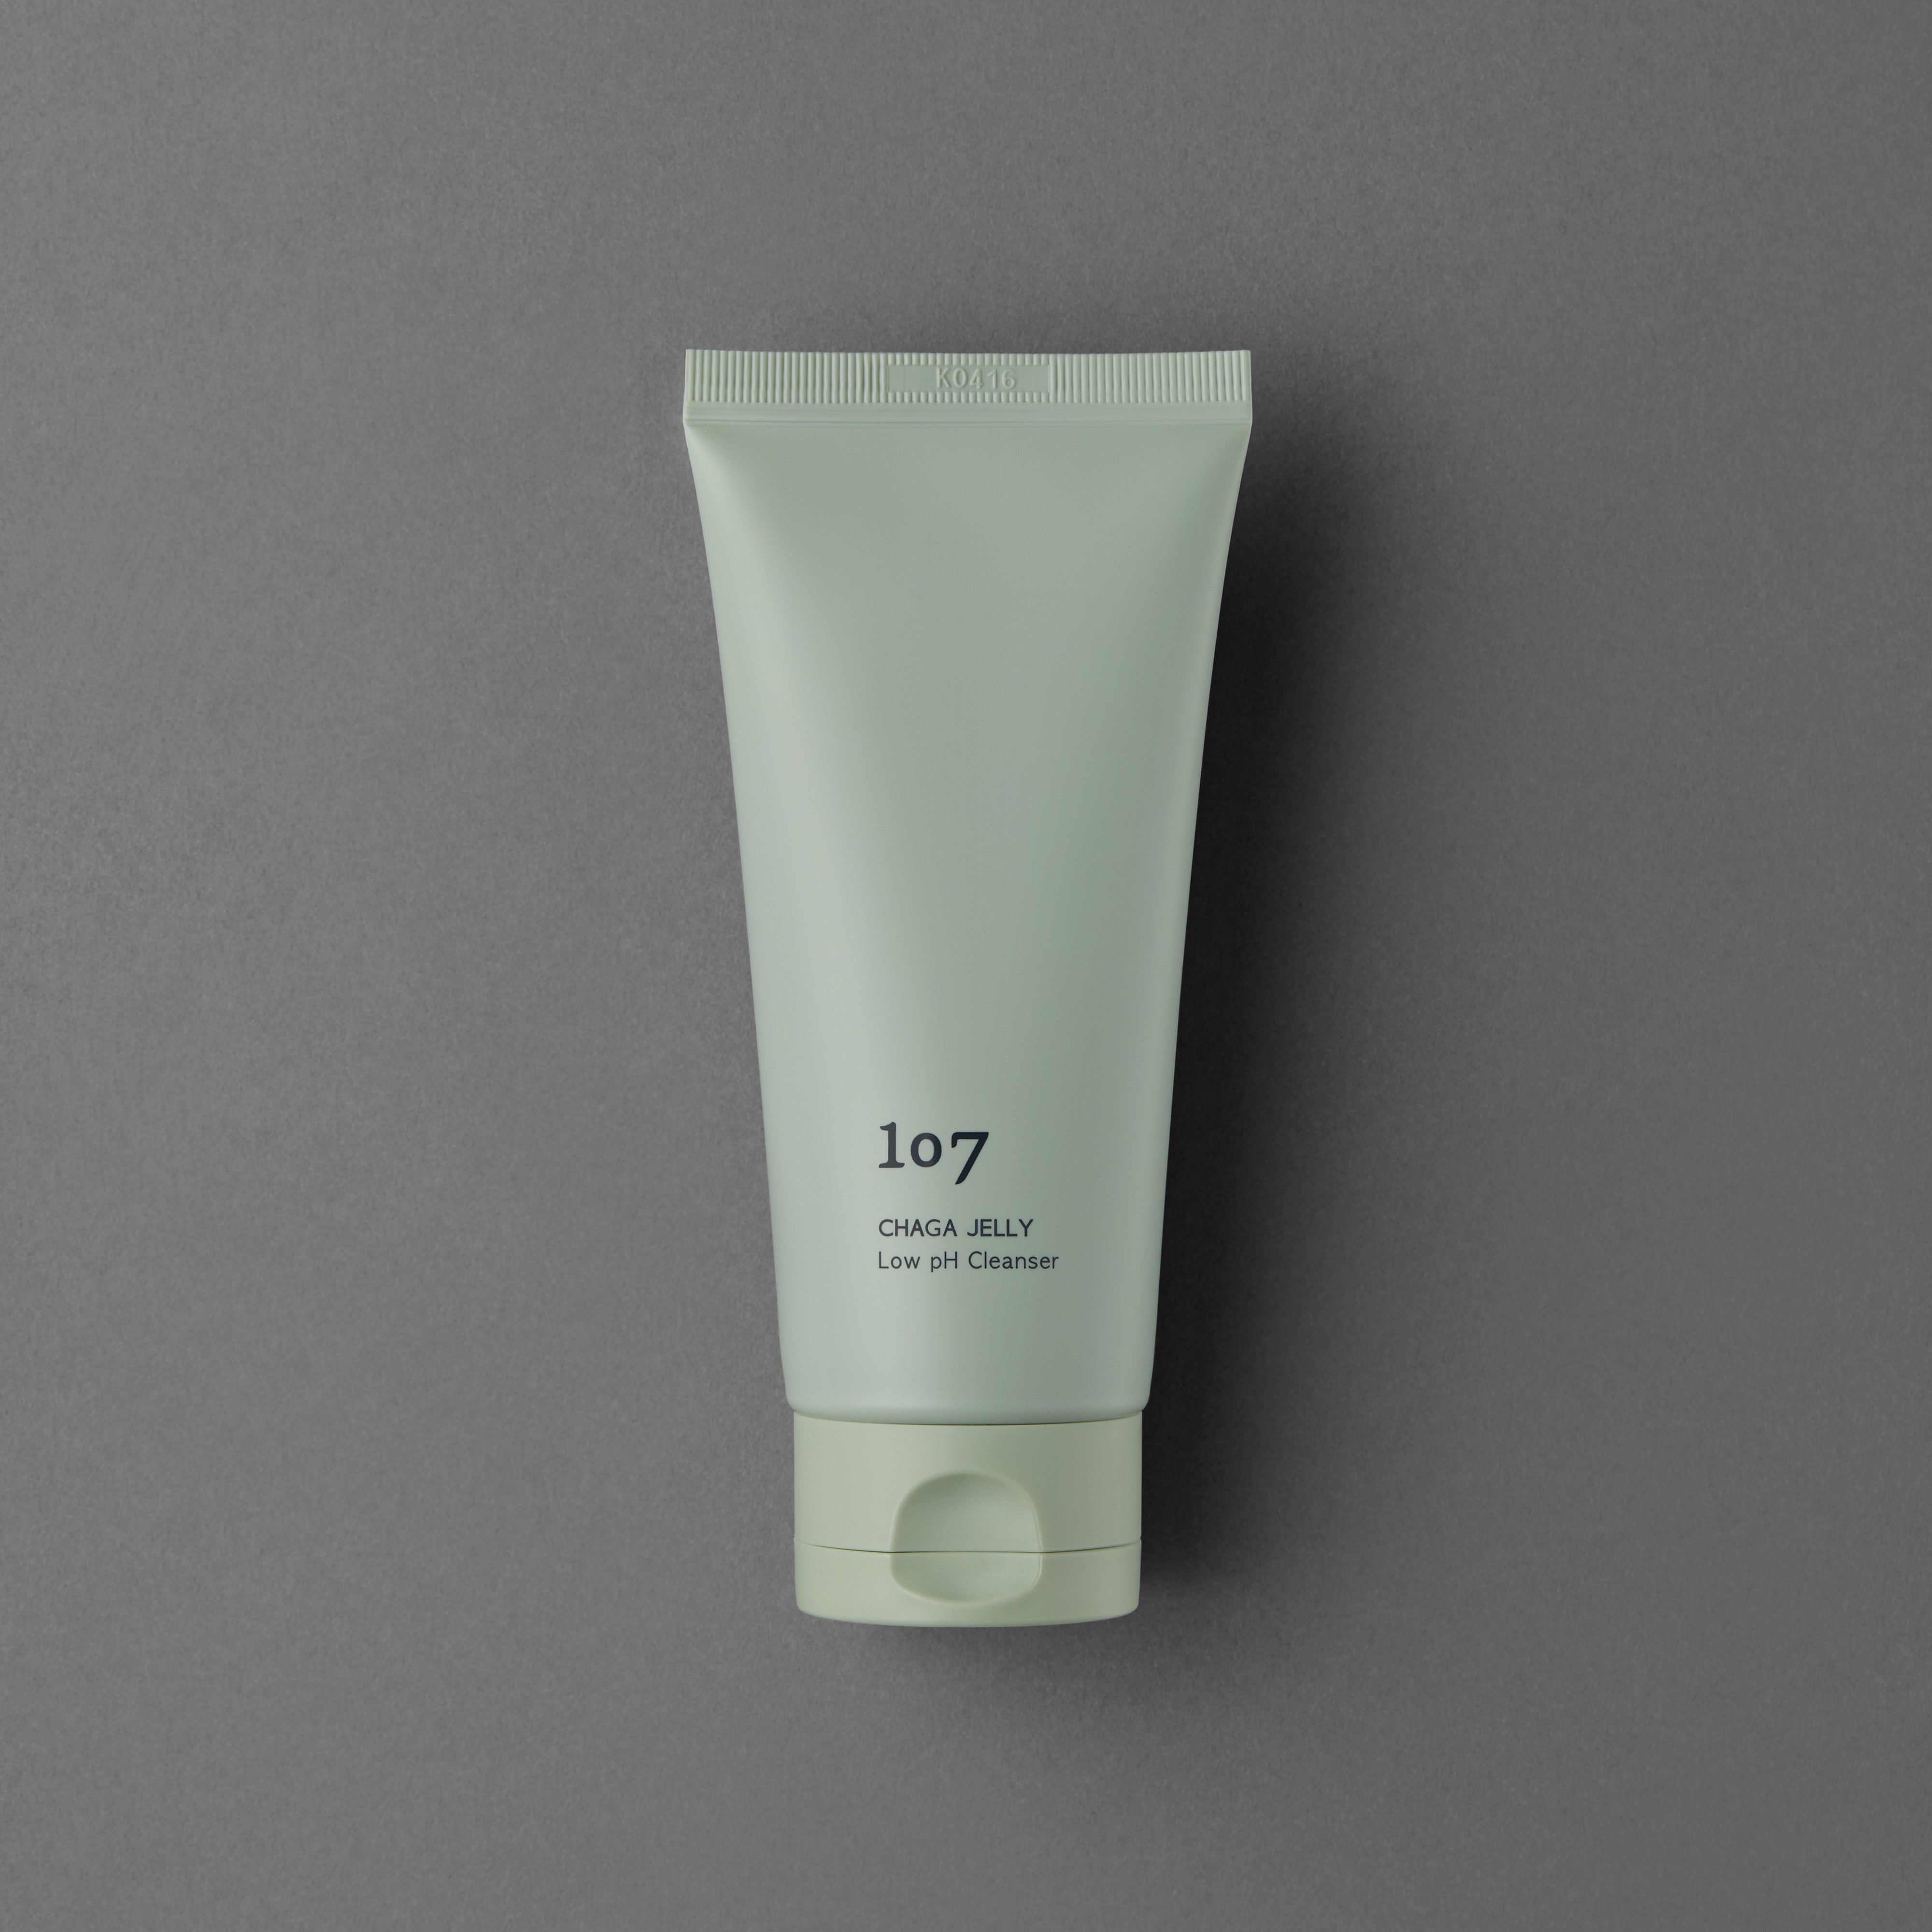 [Renewal] CHAGA JELLY Low pH Cleanser